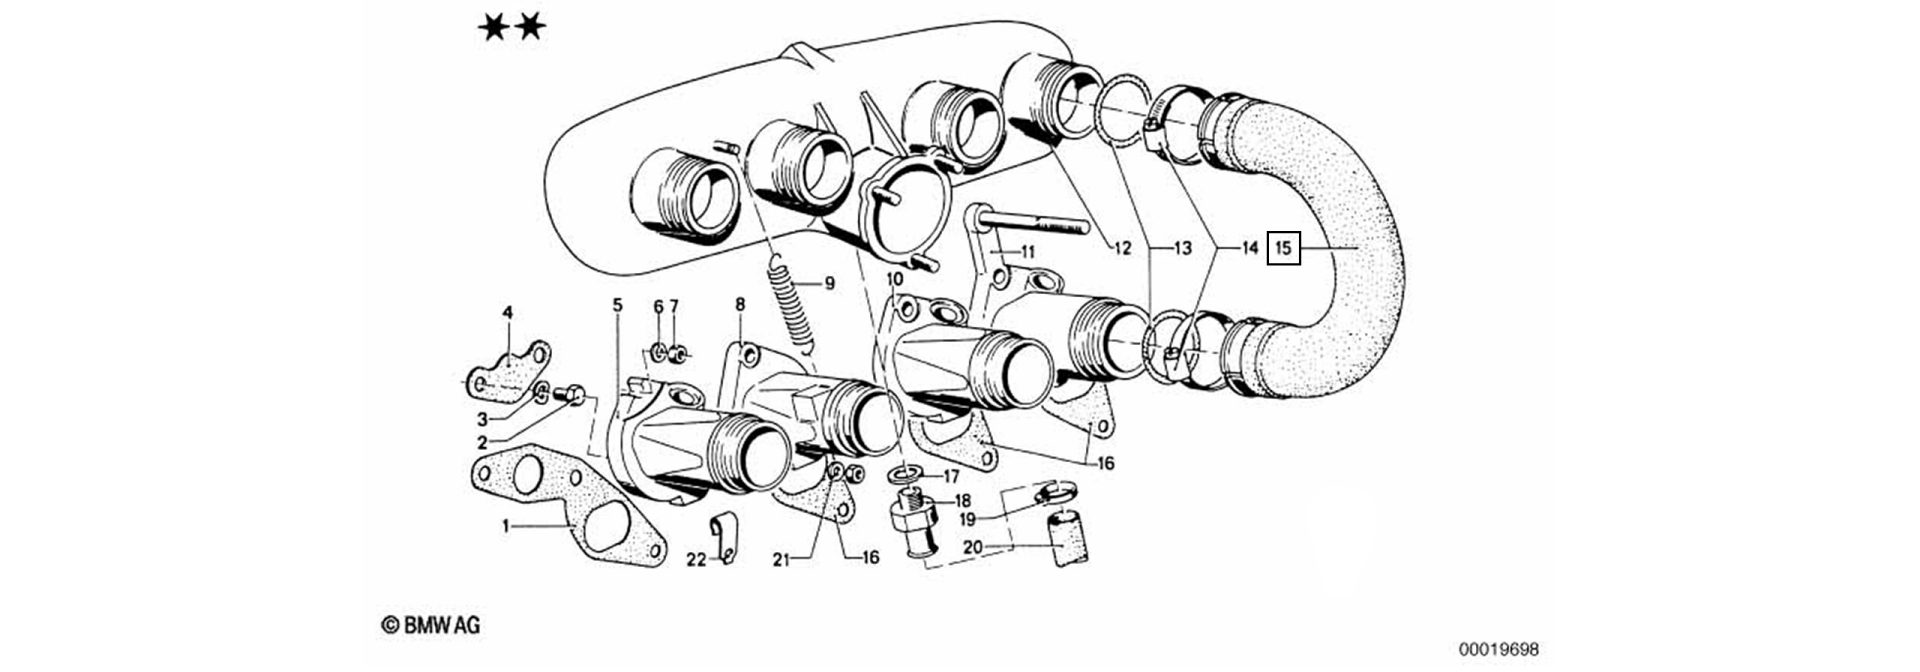 Intake tube exploded-view drawing